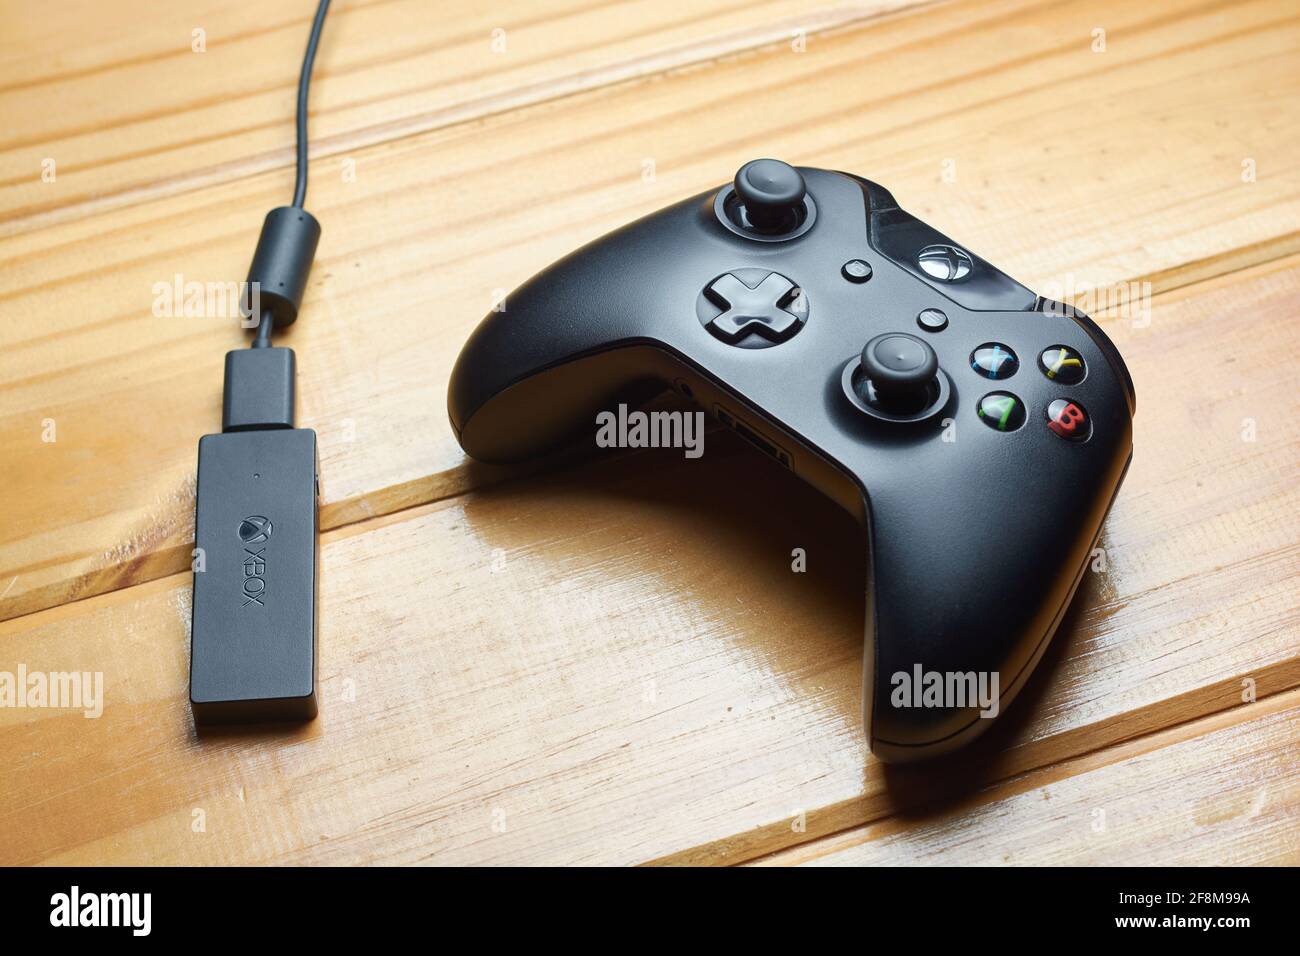 APRIL 12, 2021 - BUENOS AIRES, ARGENTINA: Top view of black Xbox One game controller and receiver for PC on wooden table. Stock Photo